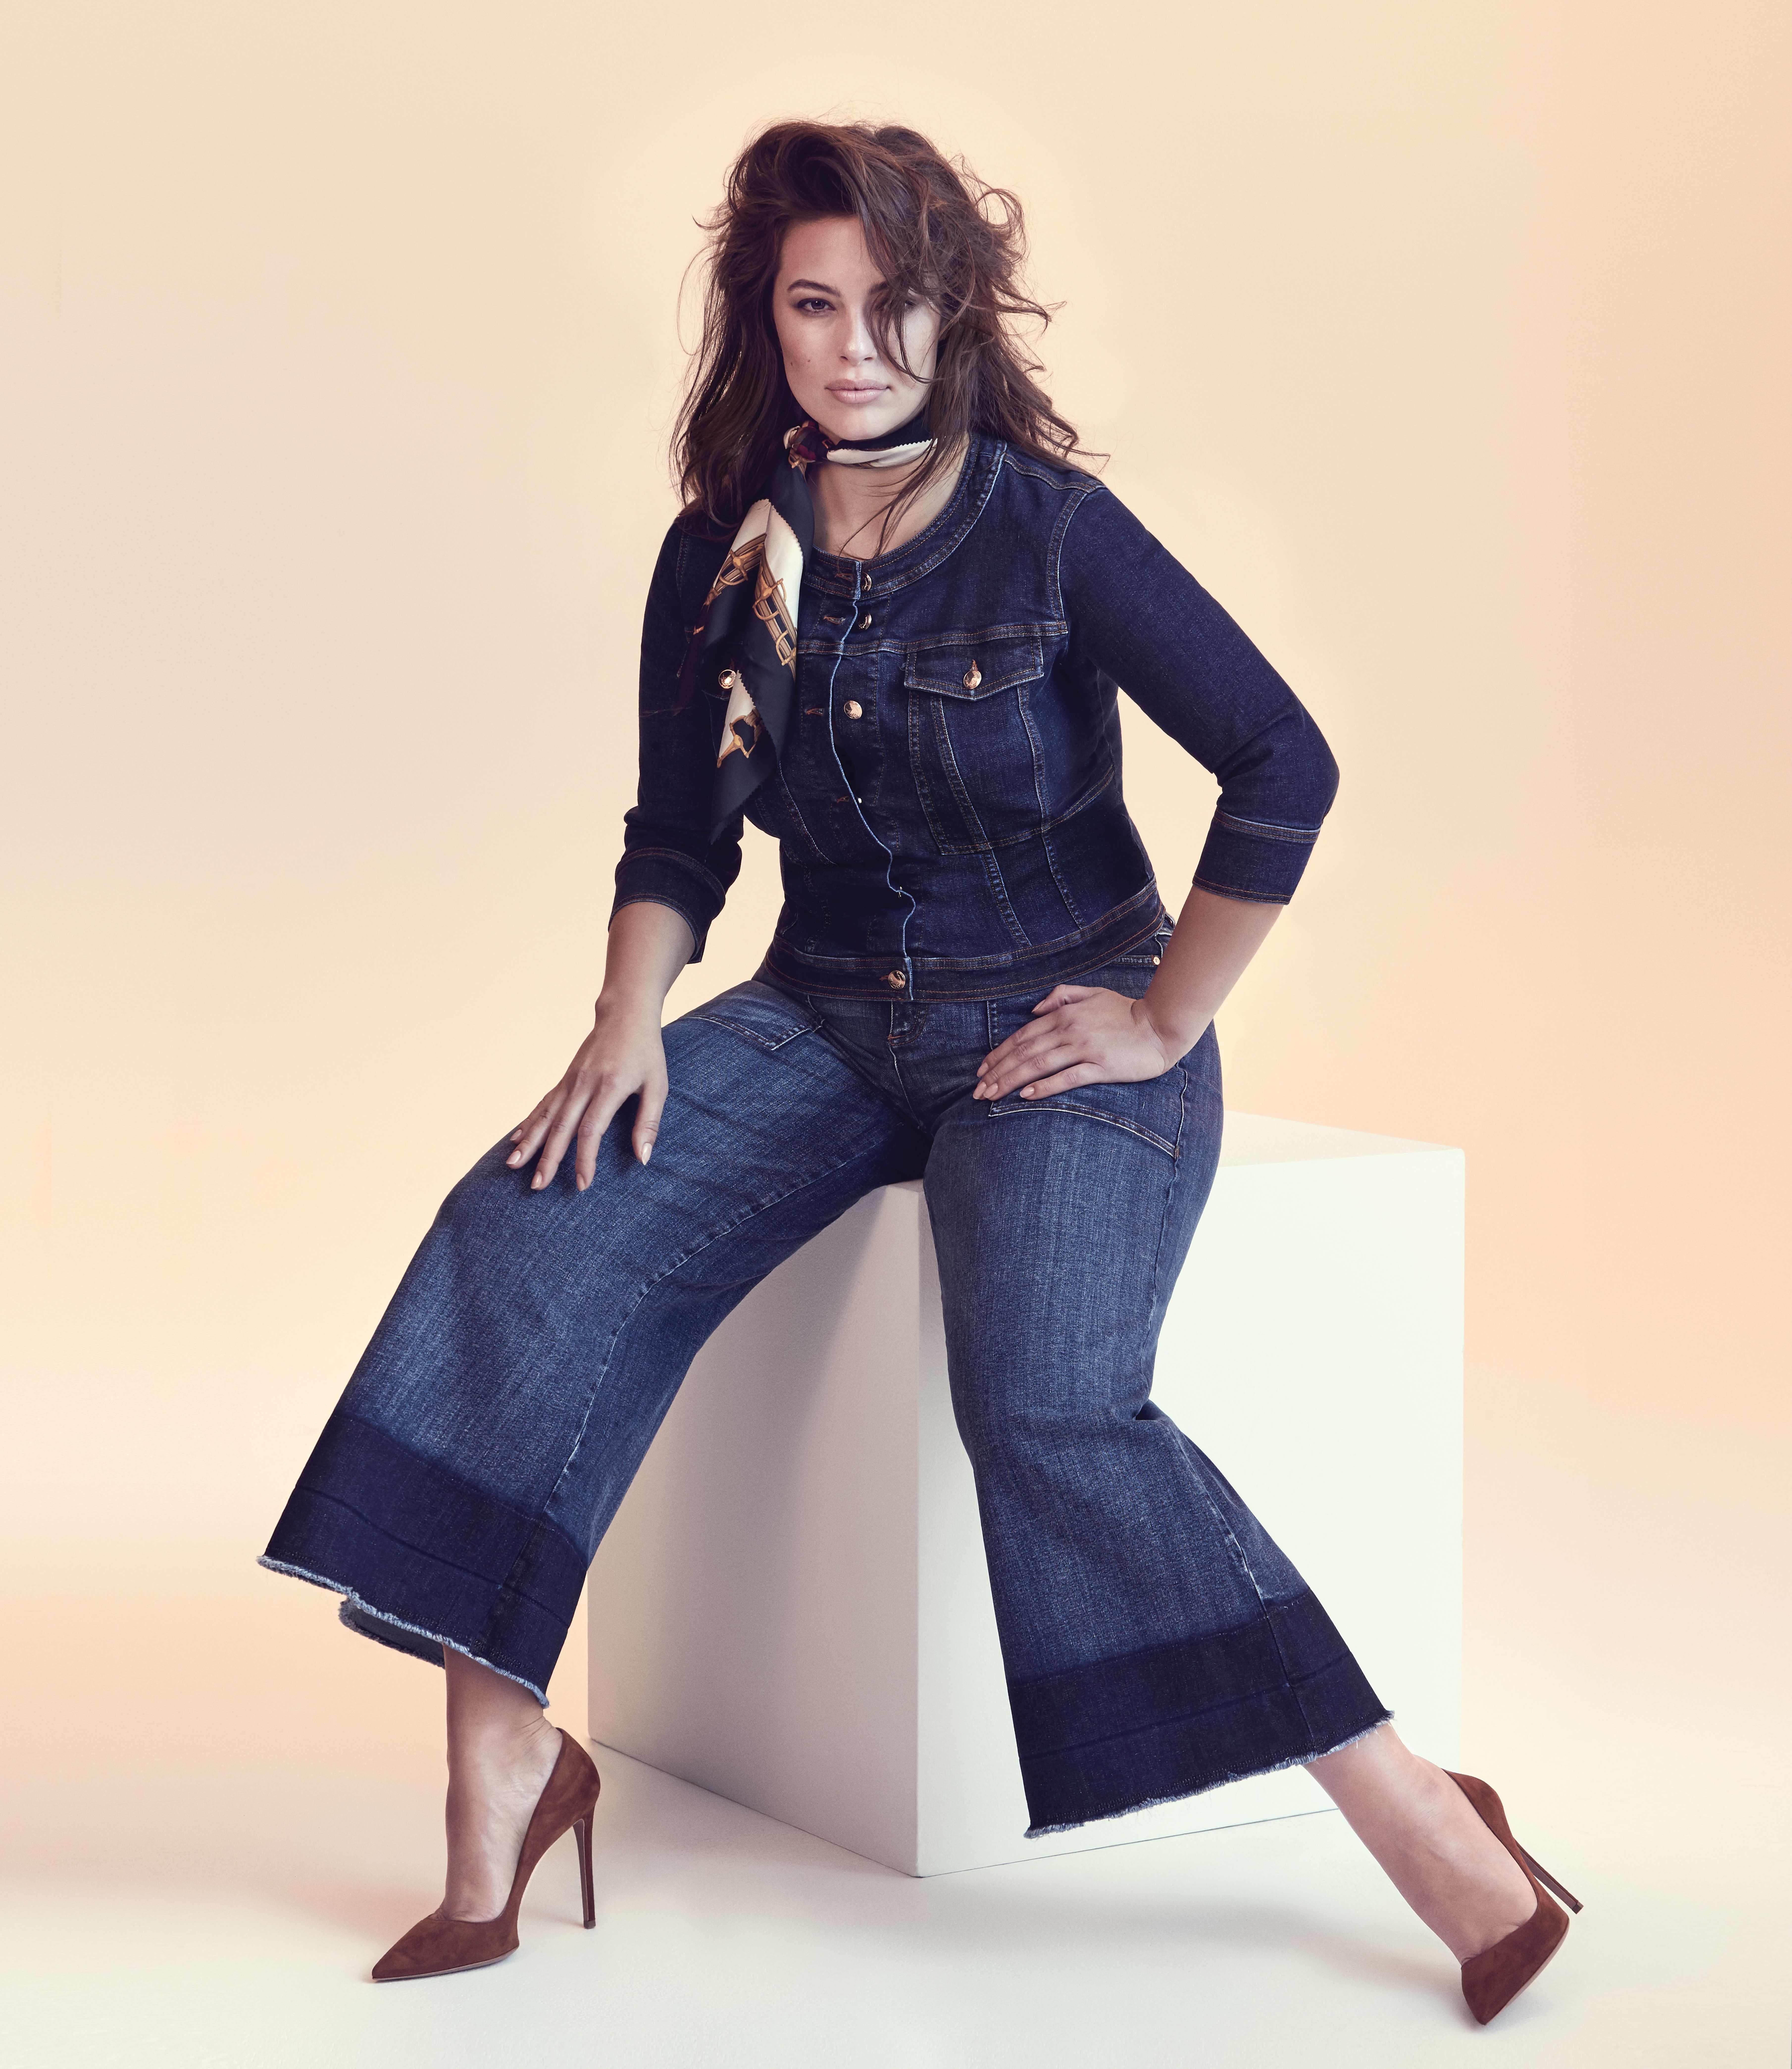 Plus Size Supermodel Ashley Graham Shows Us How To Make Denim Sexy In Stunning New Campaign